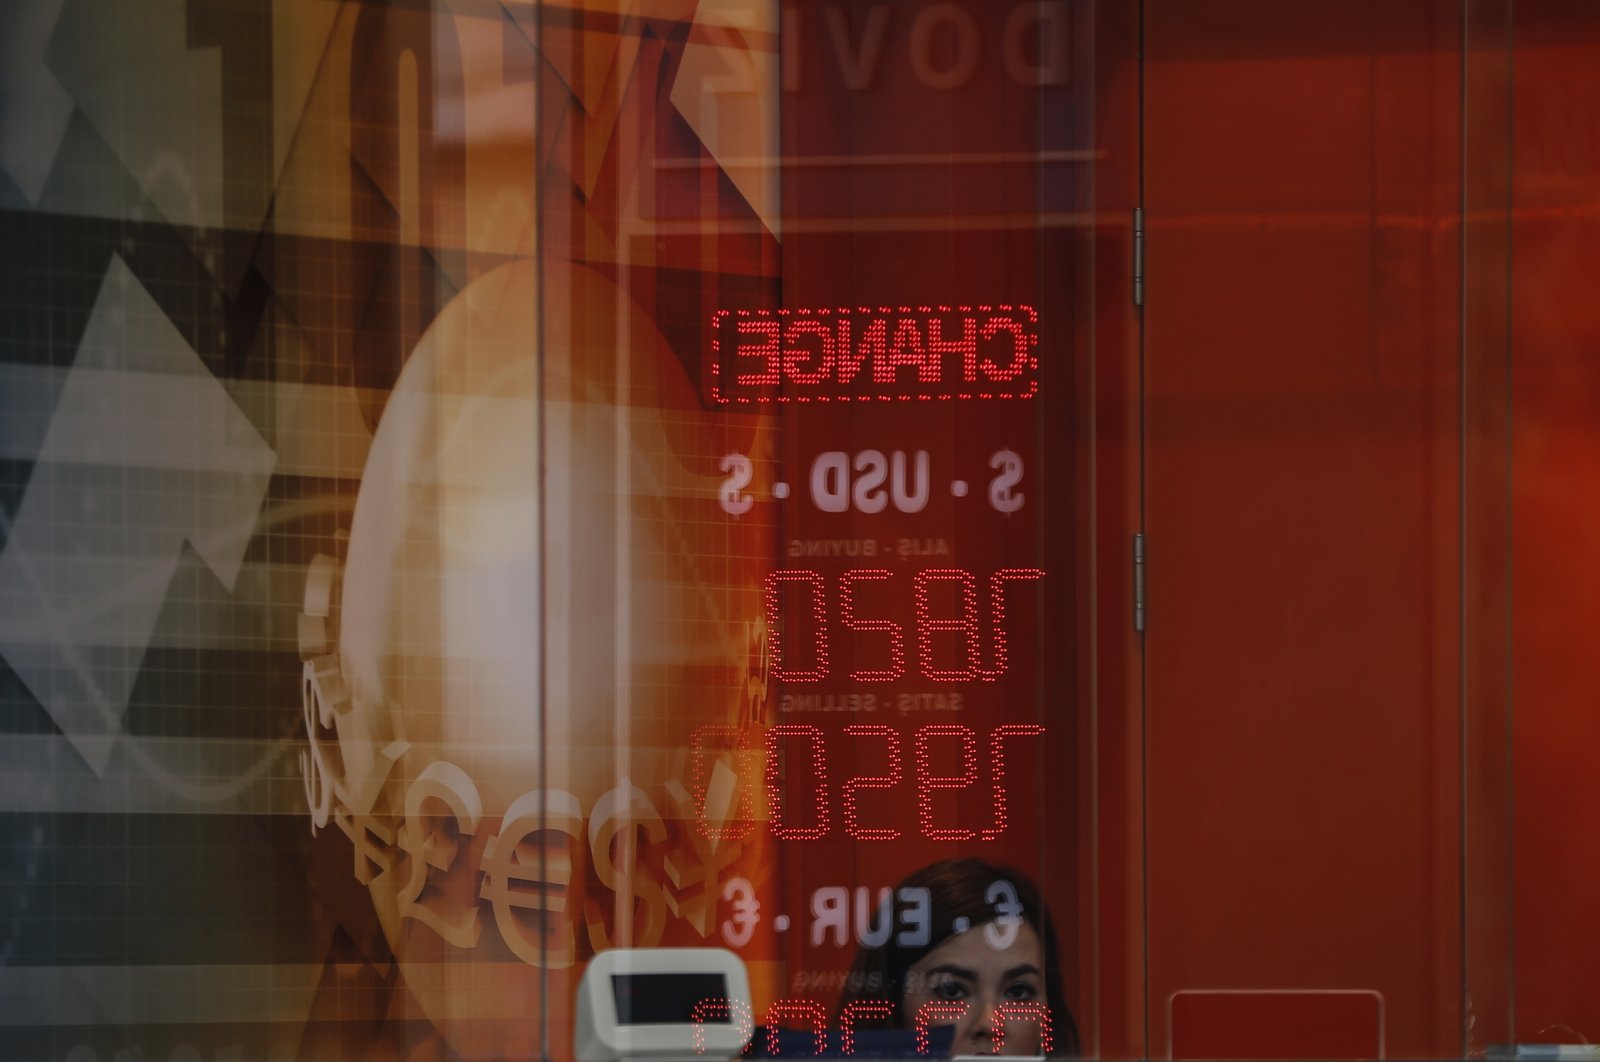 A worker in a currency exchange shop in Istiklal Avenue, the main shopping street in Istanbul, waits for customers, Istanbul, Türkiye, Oct. 9, 2020. (AP Photo)